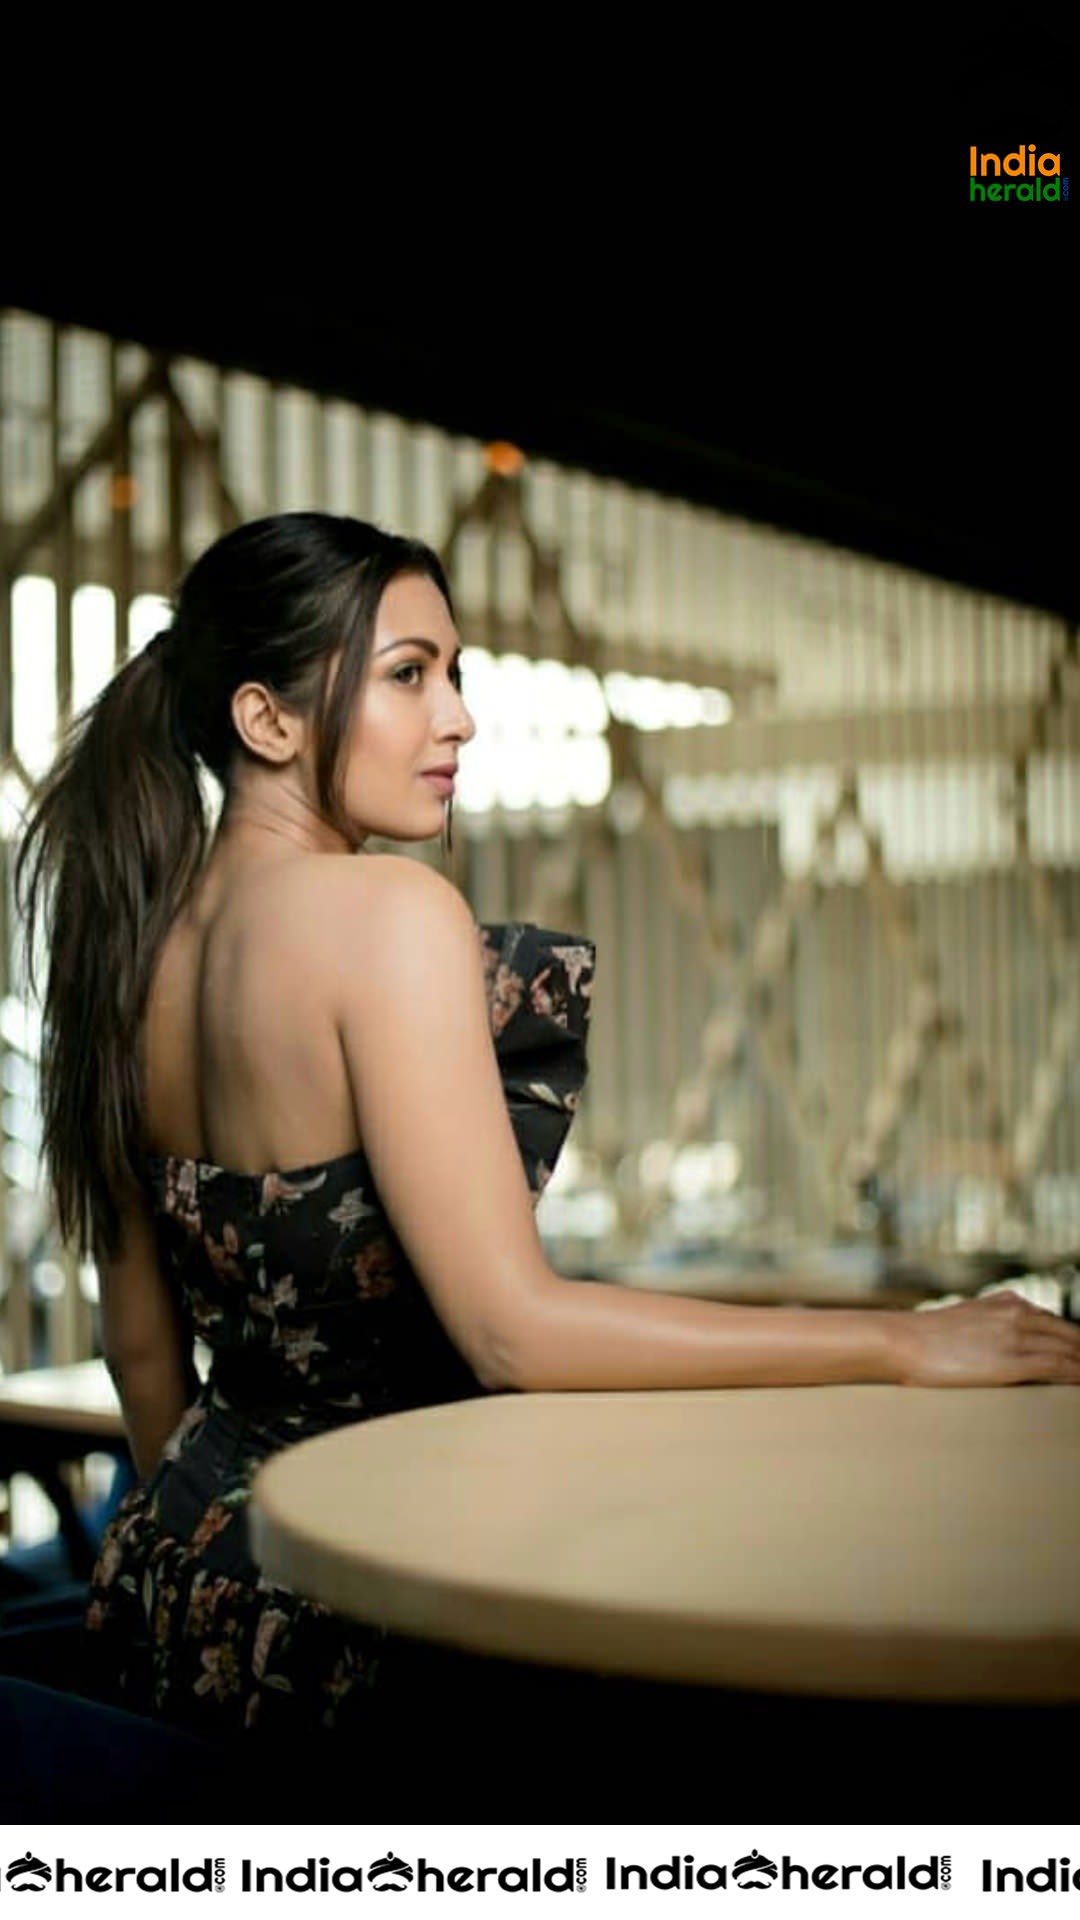 Catherine Tresa is just Black Hot in these stills